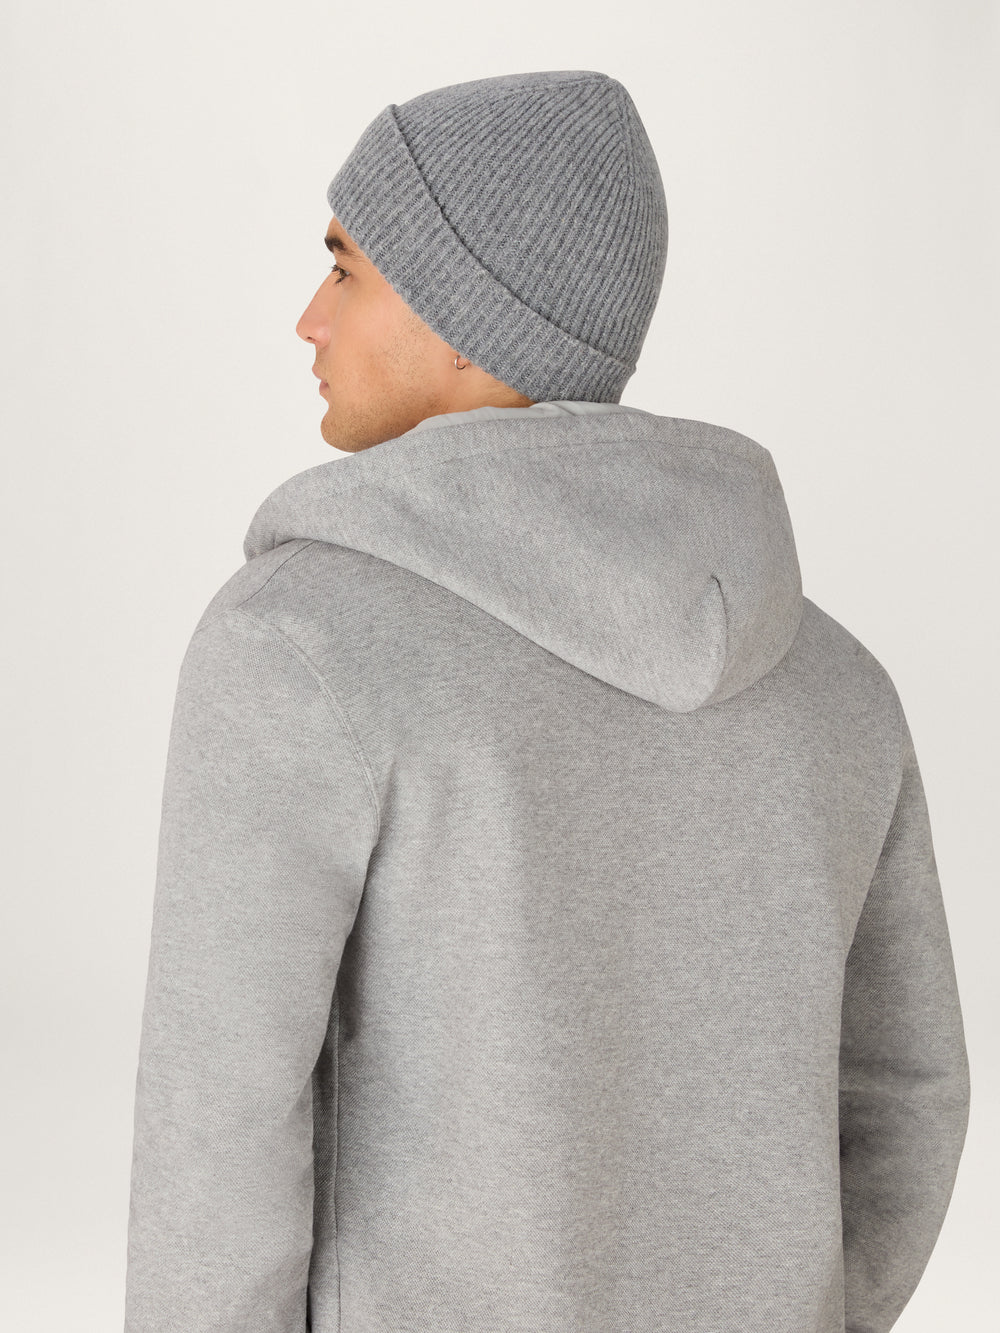 The Knitted Hat || Grey | Wool